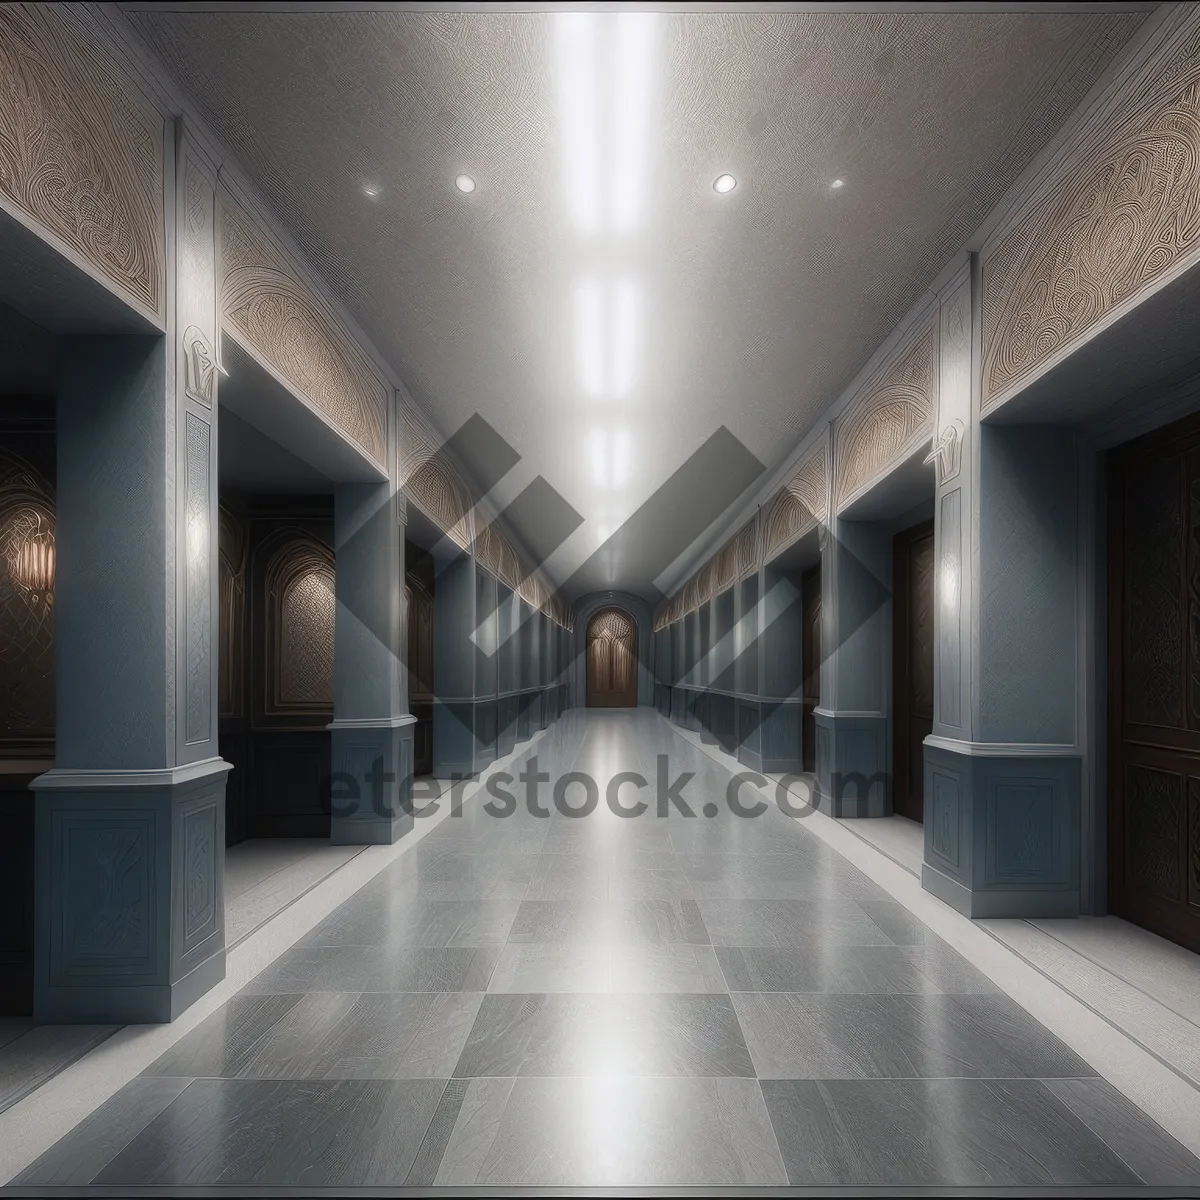 Picture of Modern Hallway with Columns and Natural Light